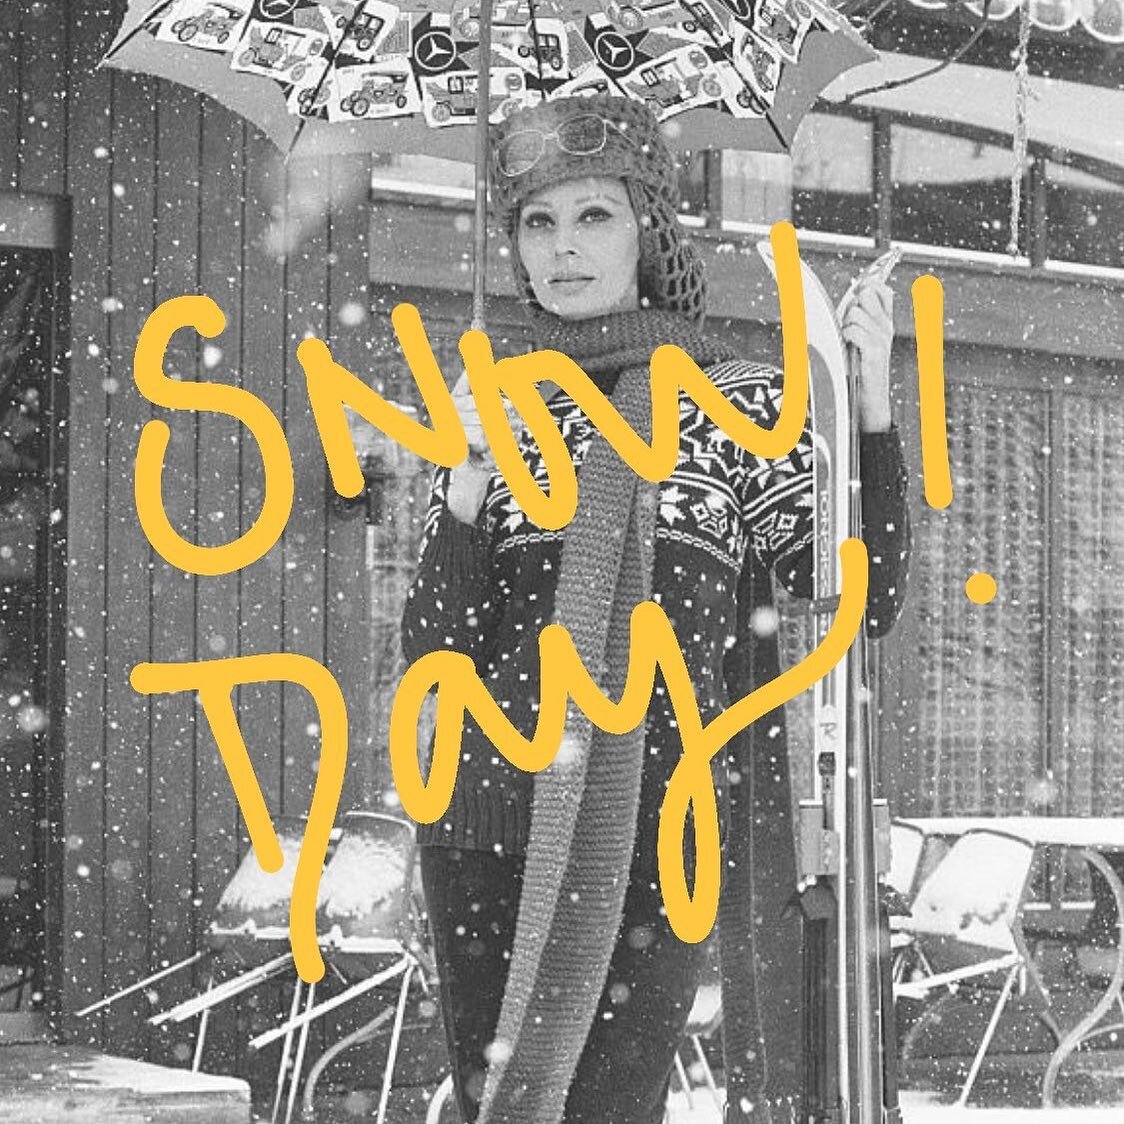 Well would ya look who gets a snow day! The shop is closed today, but there are plenty of goods online to keep you company! See you tomorrow! (Idk, maybe&hellip;that&rsquo;s tbd) ❄️😘